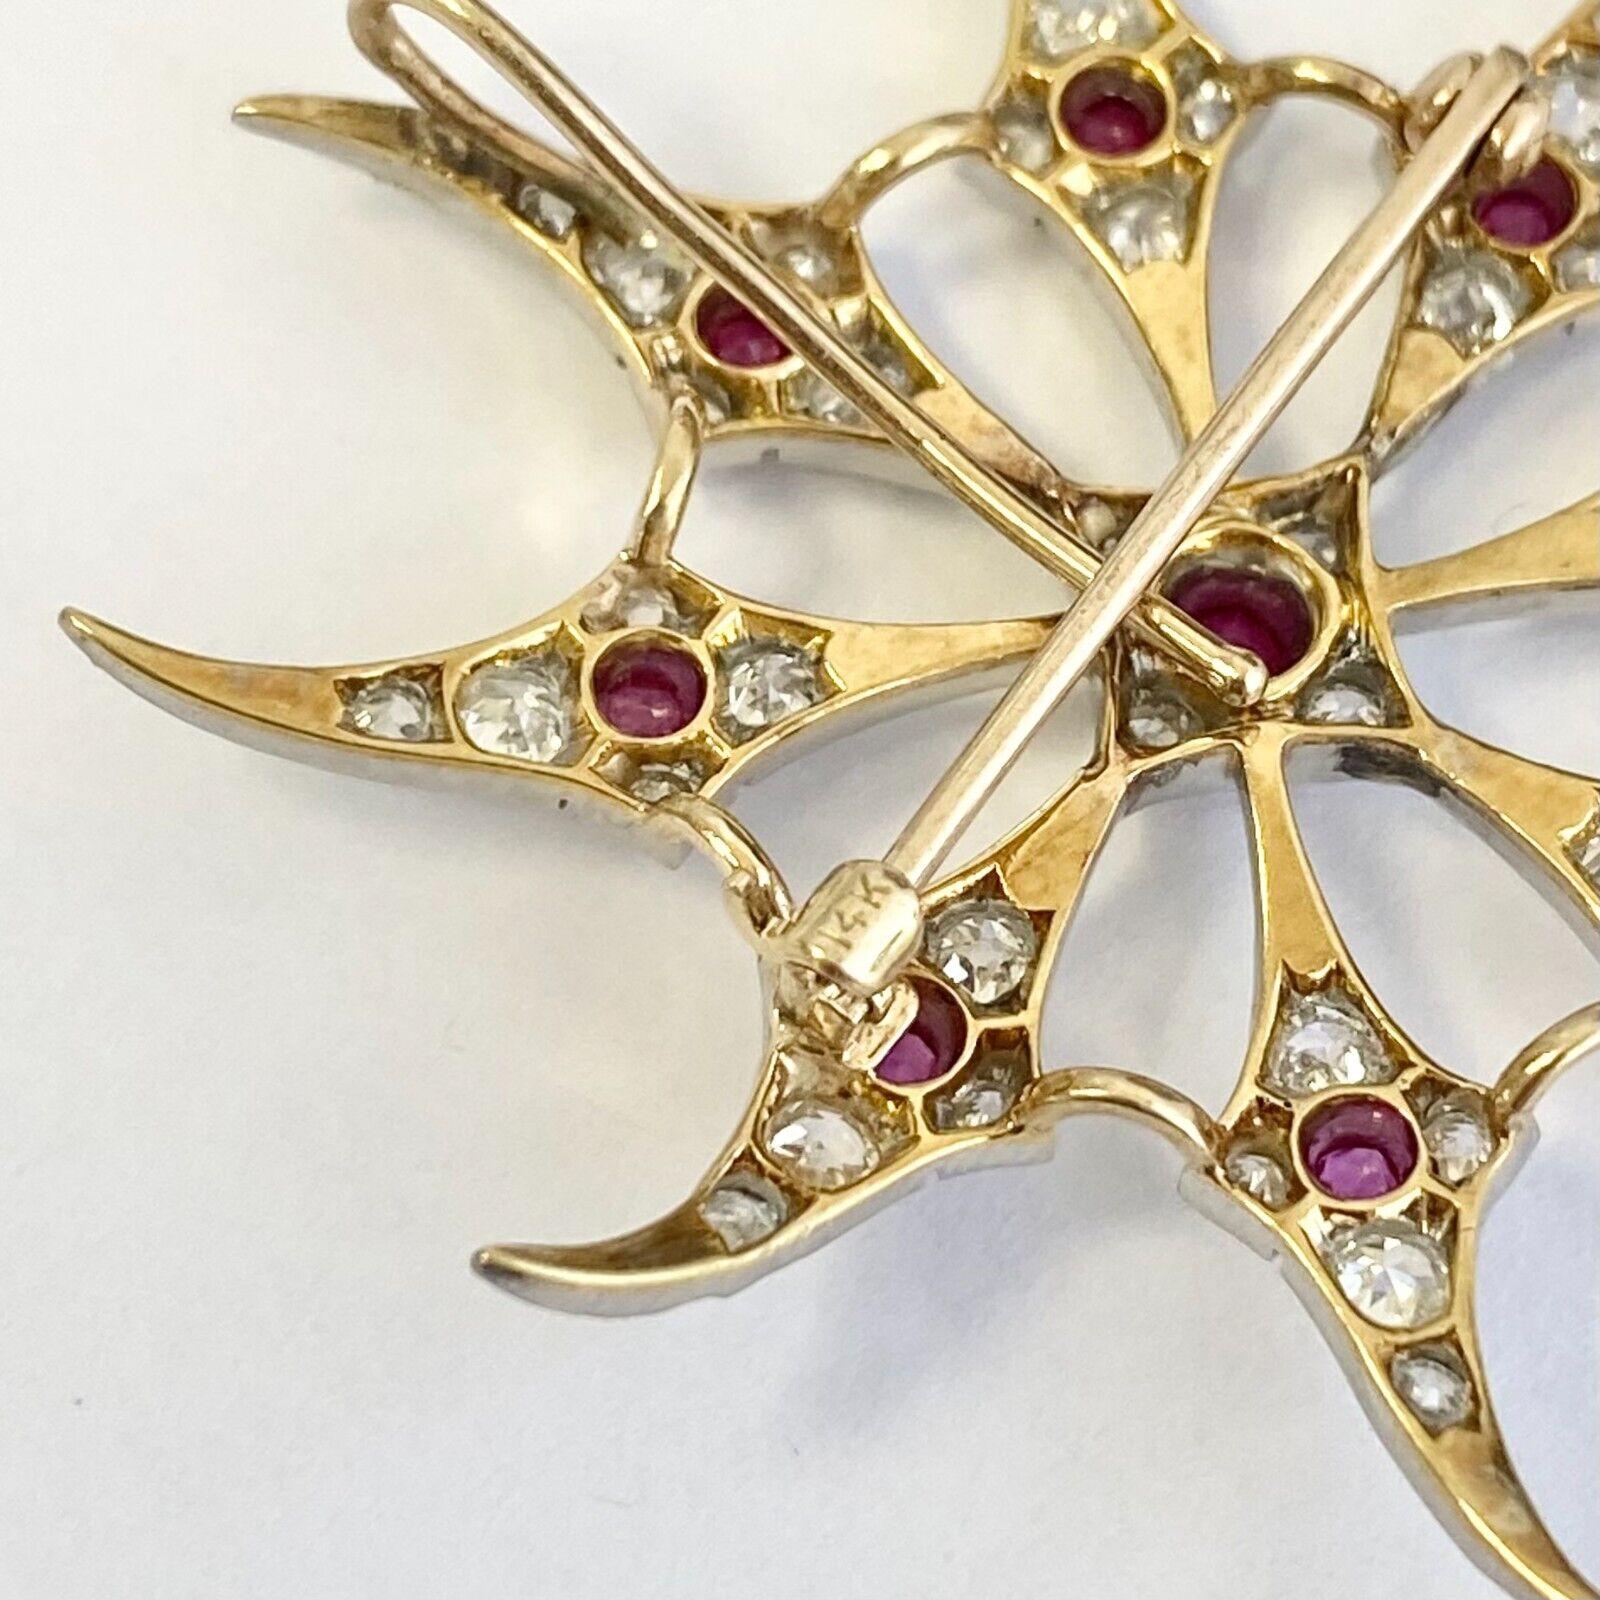 Vintage 14k 3 Tone Gold Diamond and Ruby 